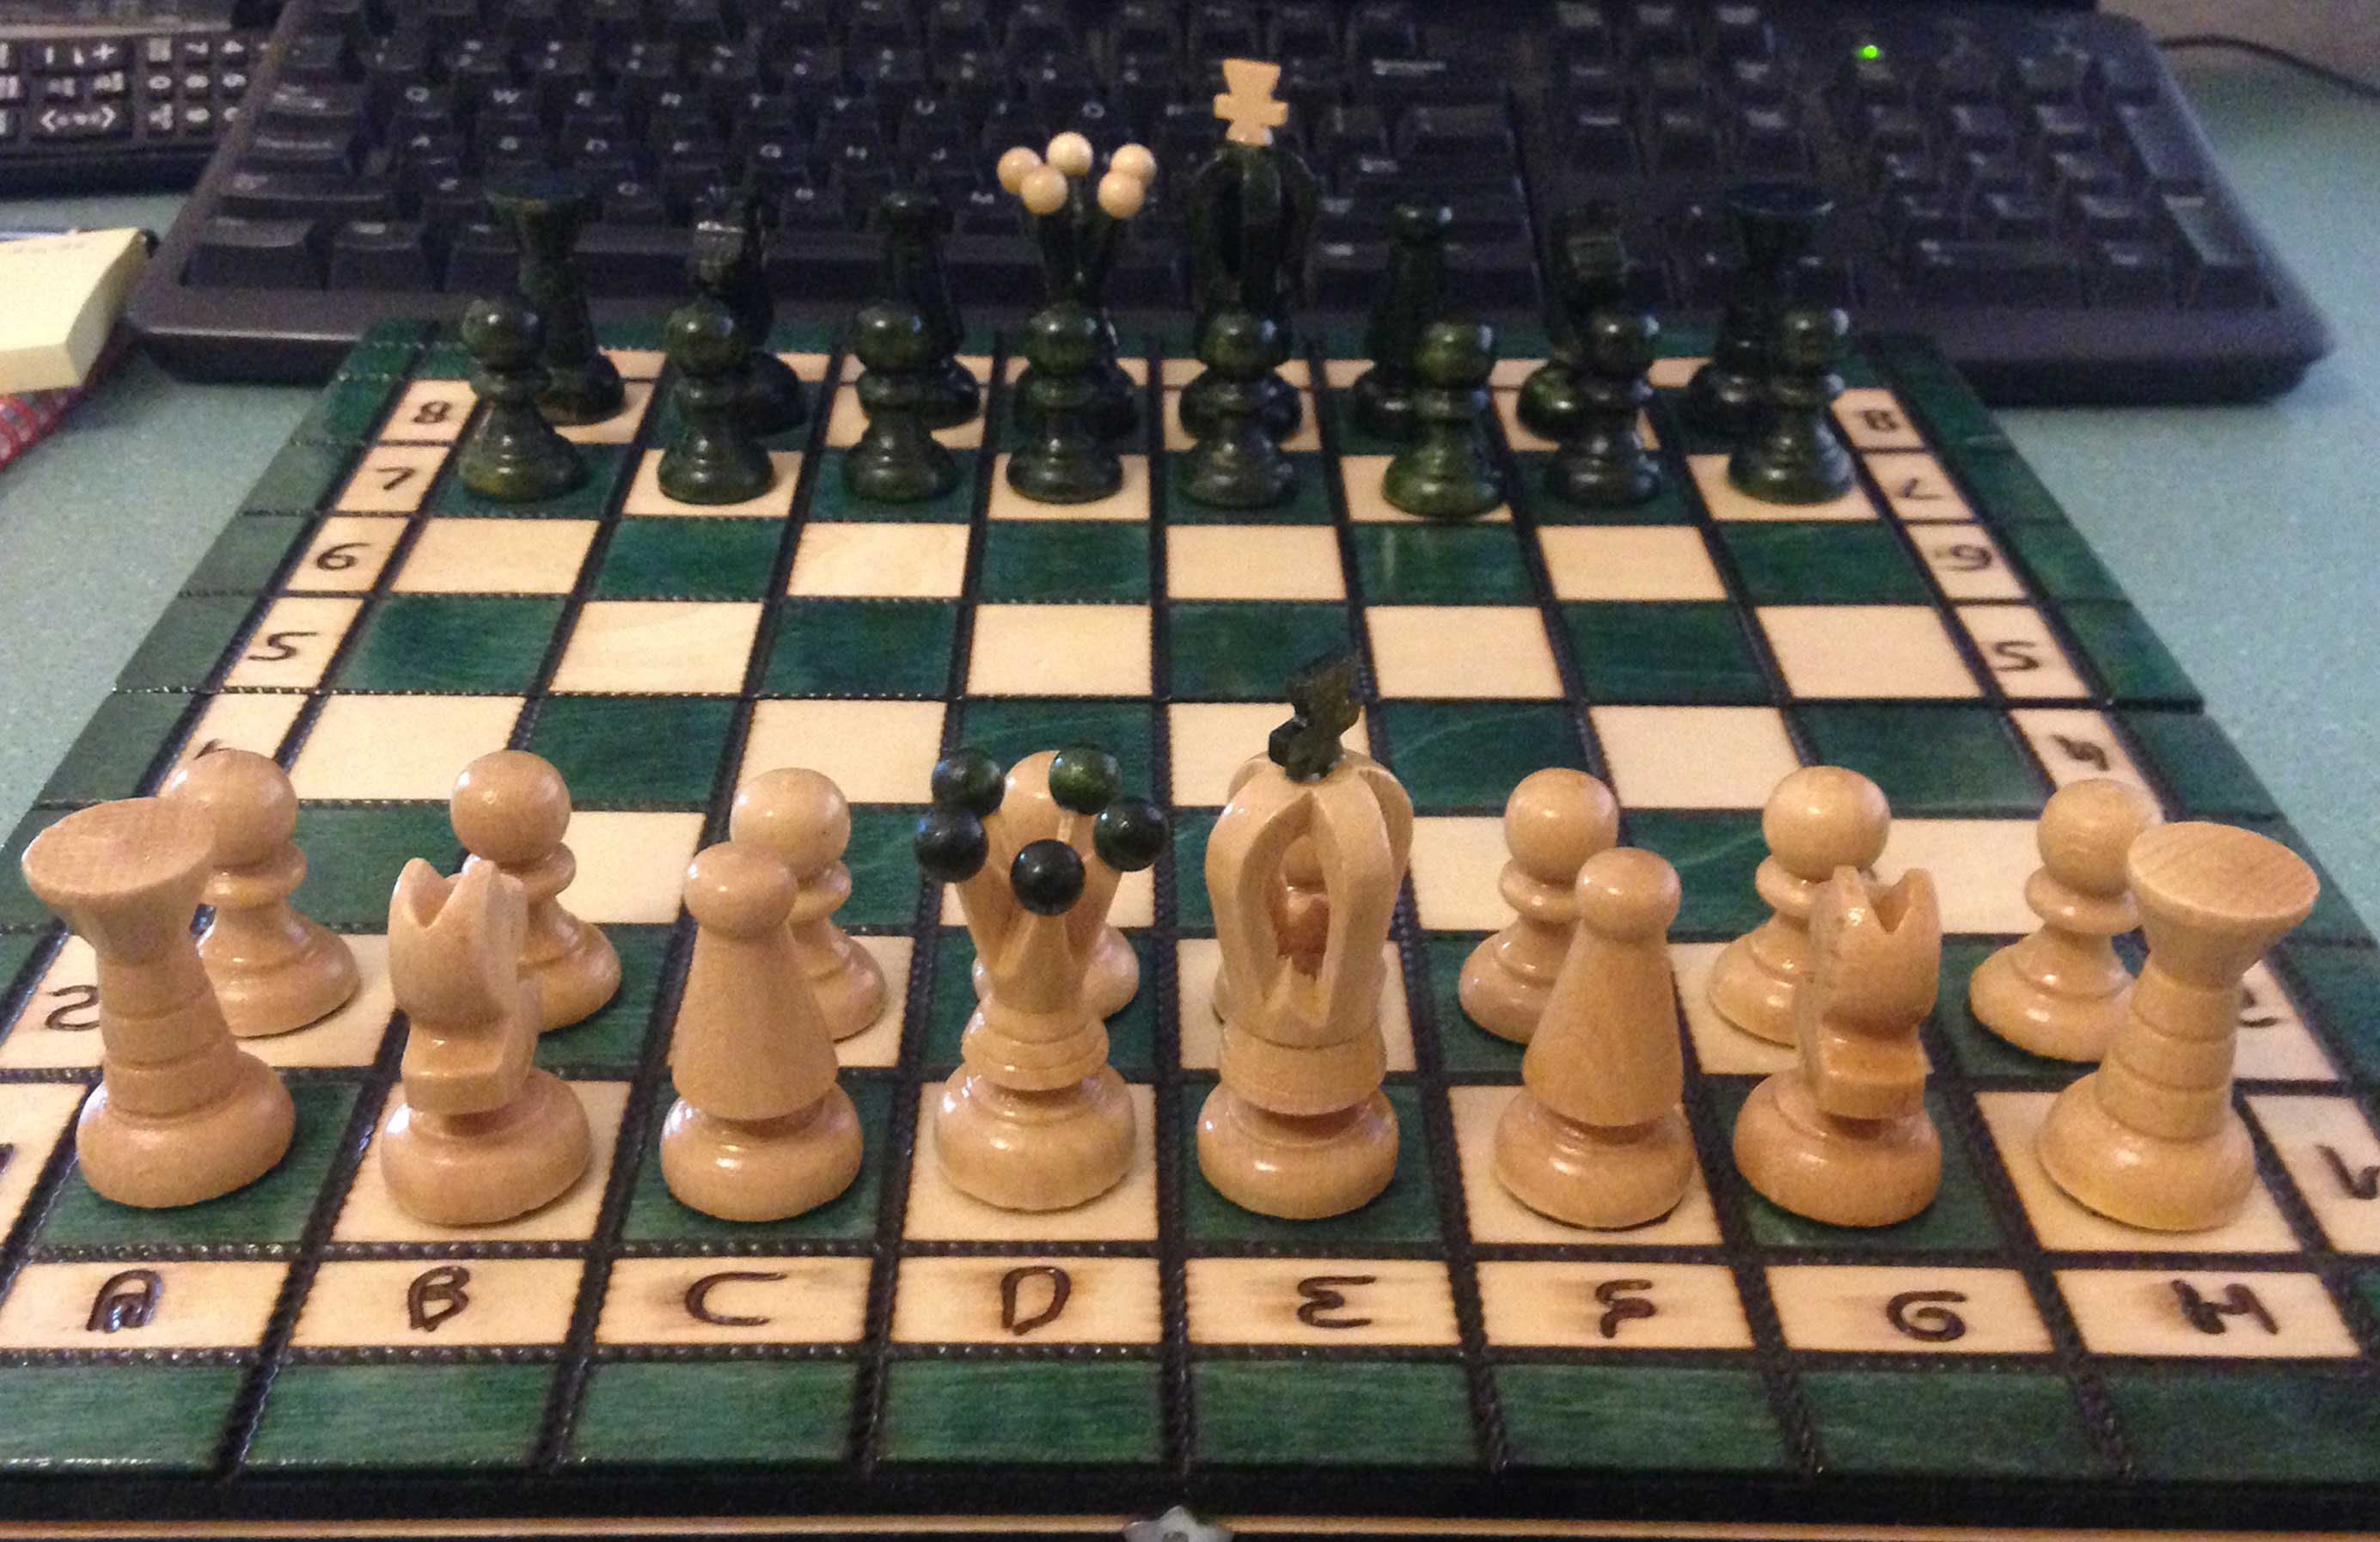 My old chessboard